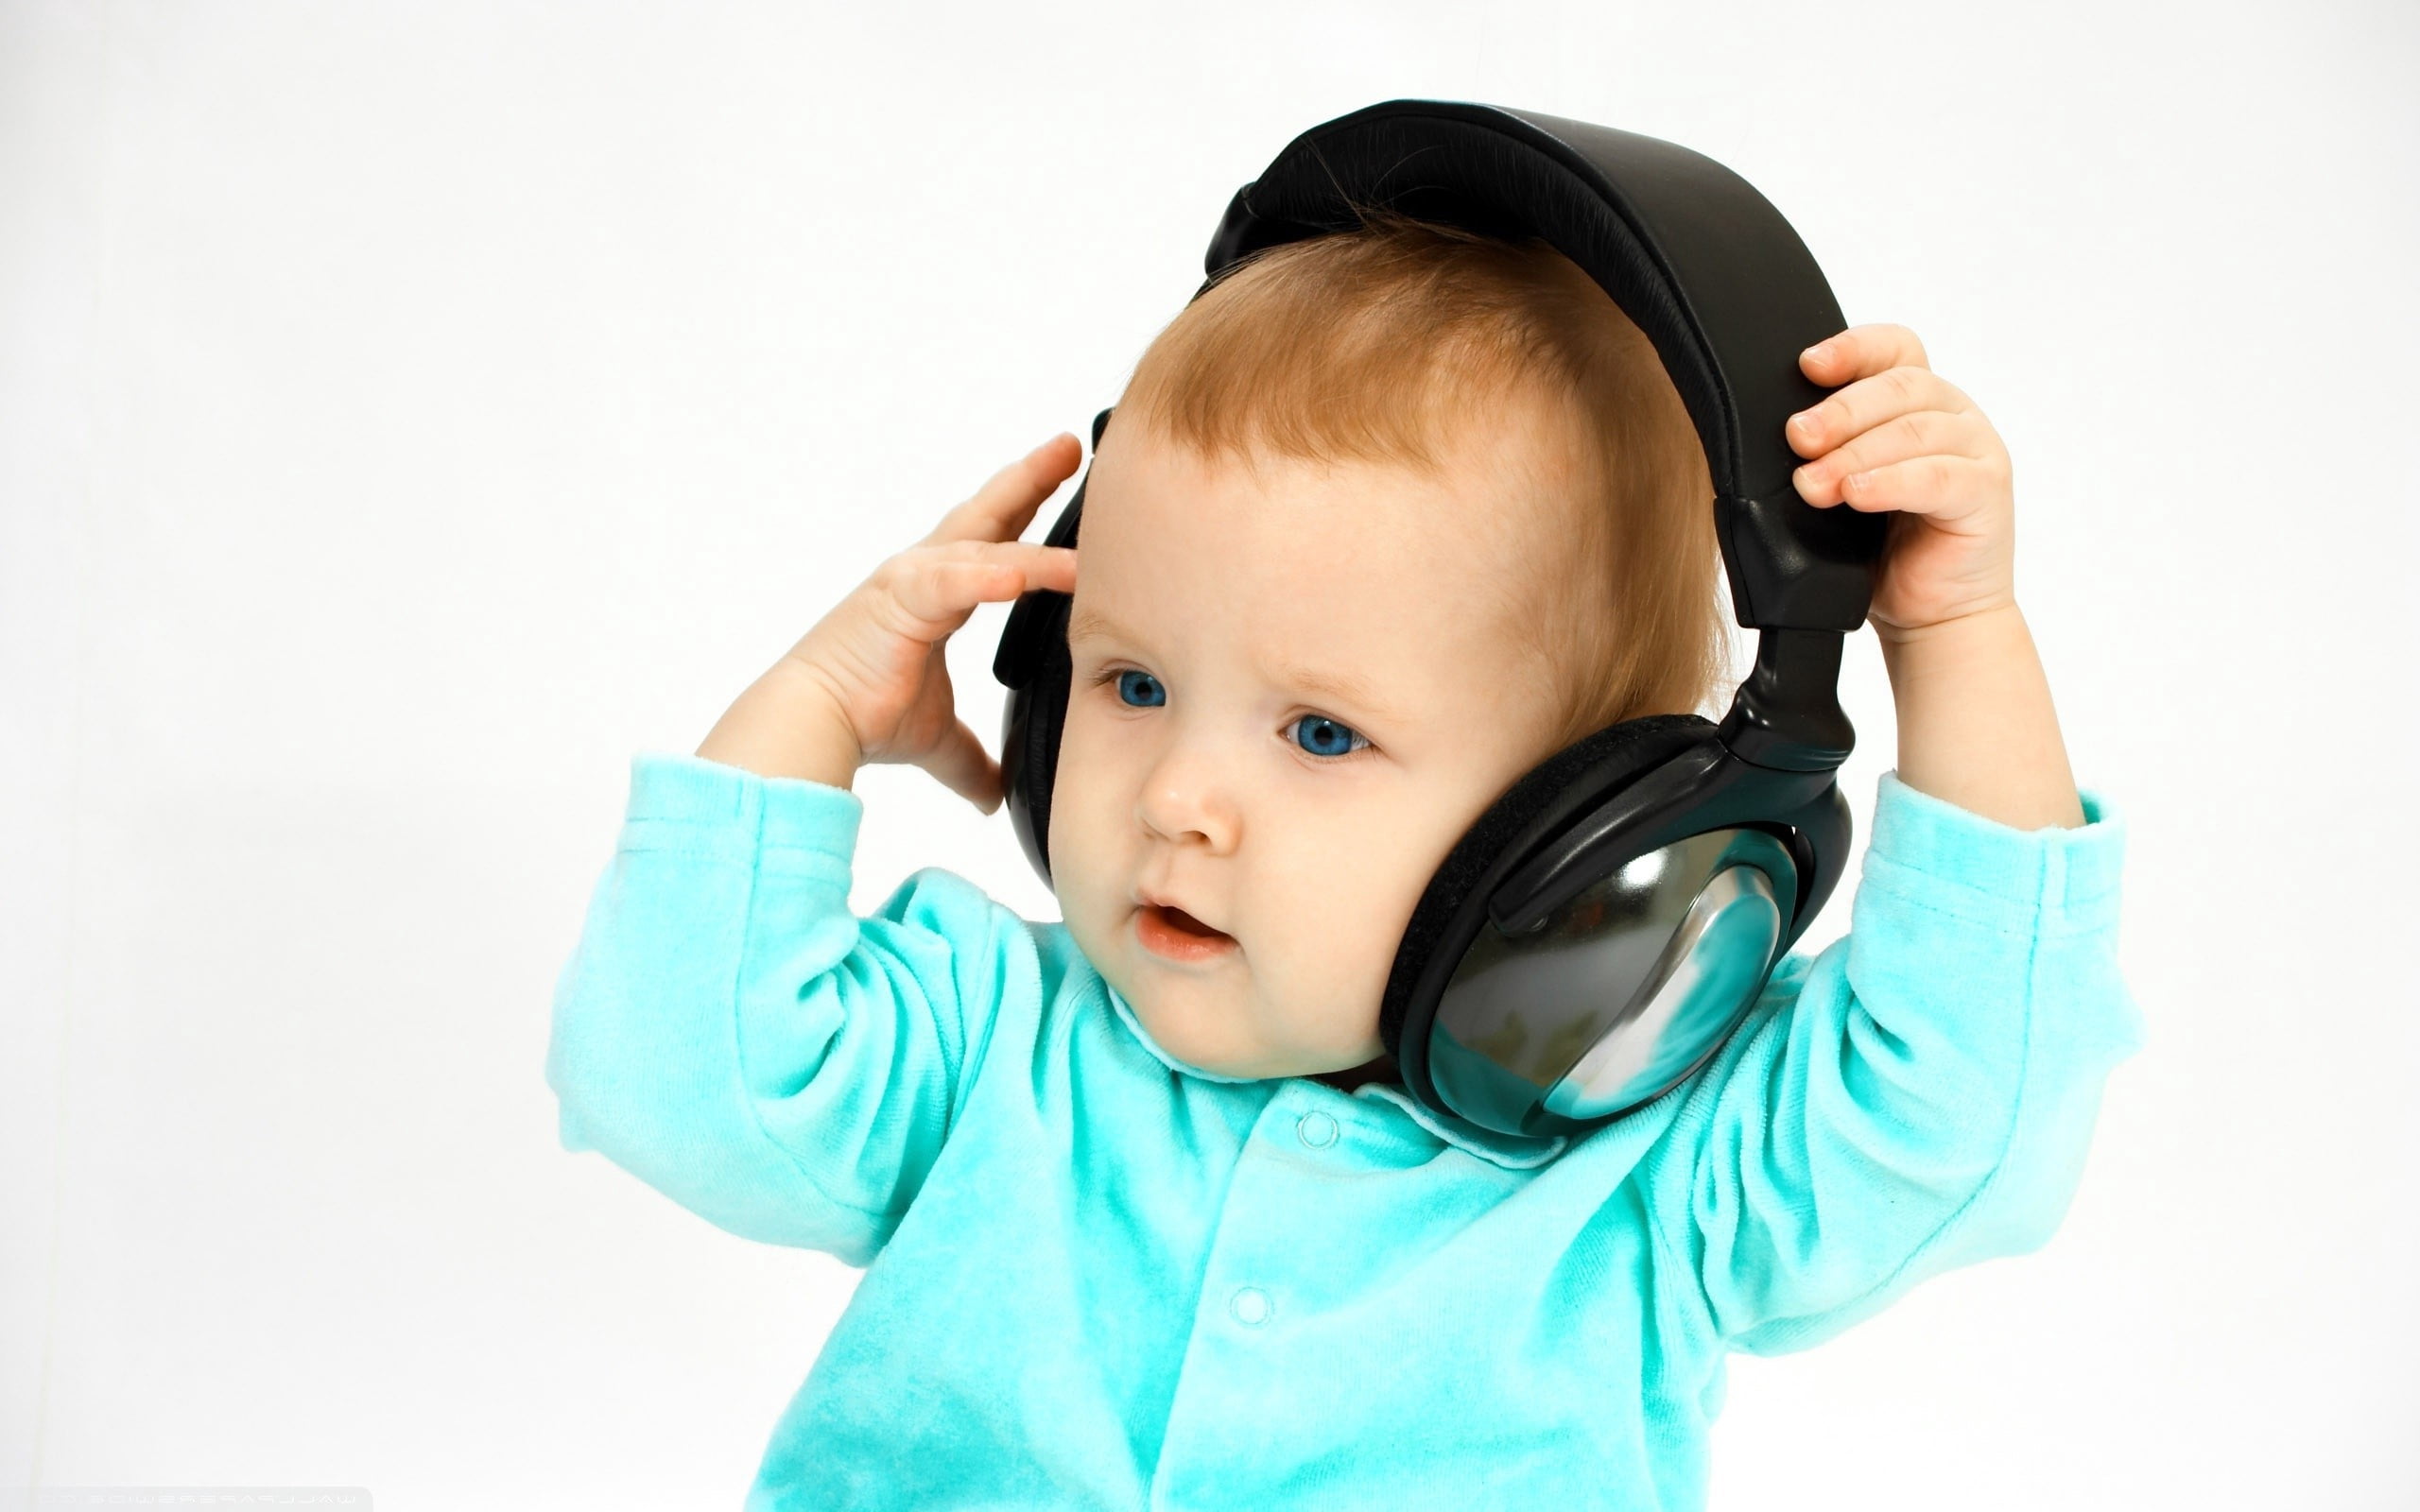 black wireless headphones and baby's teal jacket, child, face